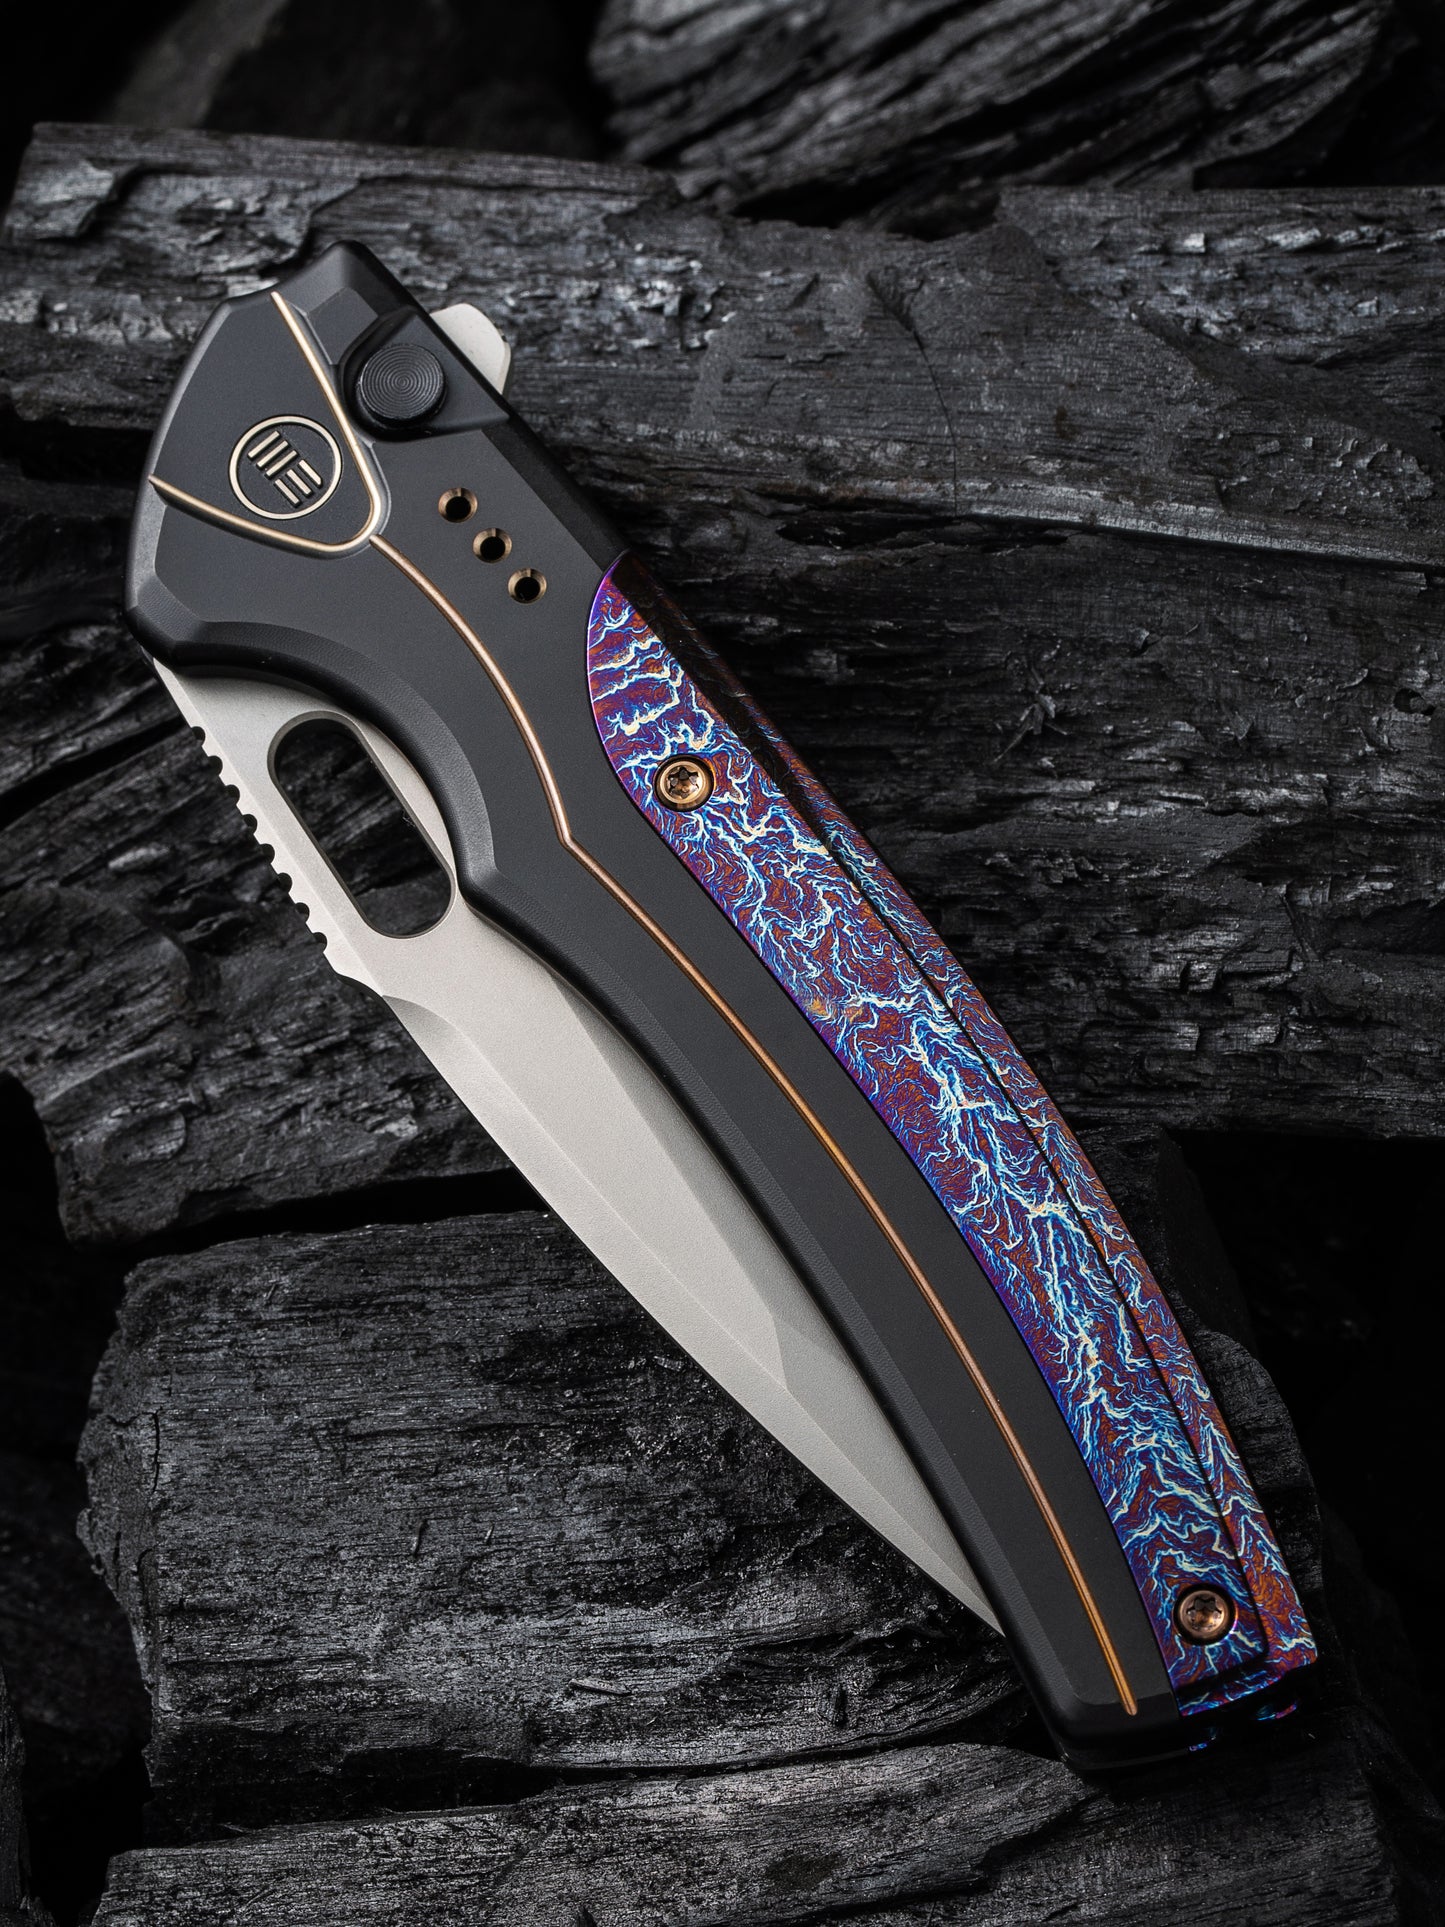 WE Exciton Limited Edition 3.68" CPM 20CV Flamed Titanium Integral Spacer Folding Knife WE22038A-6